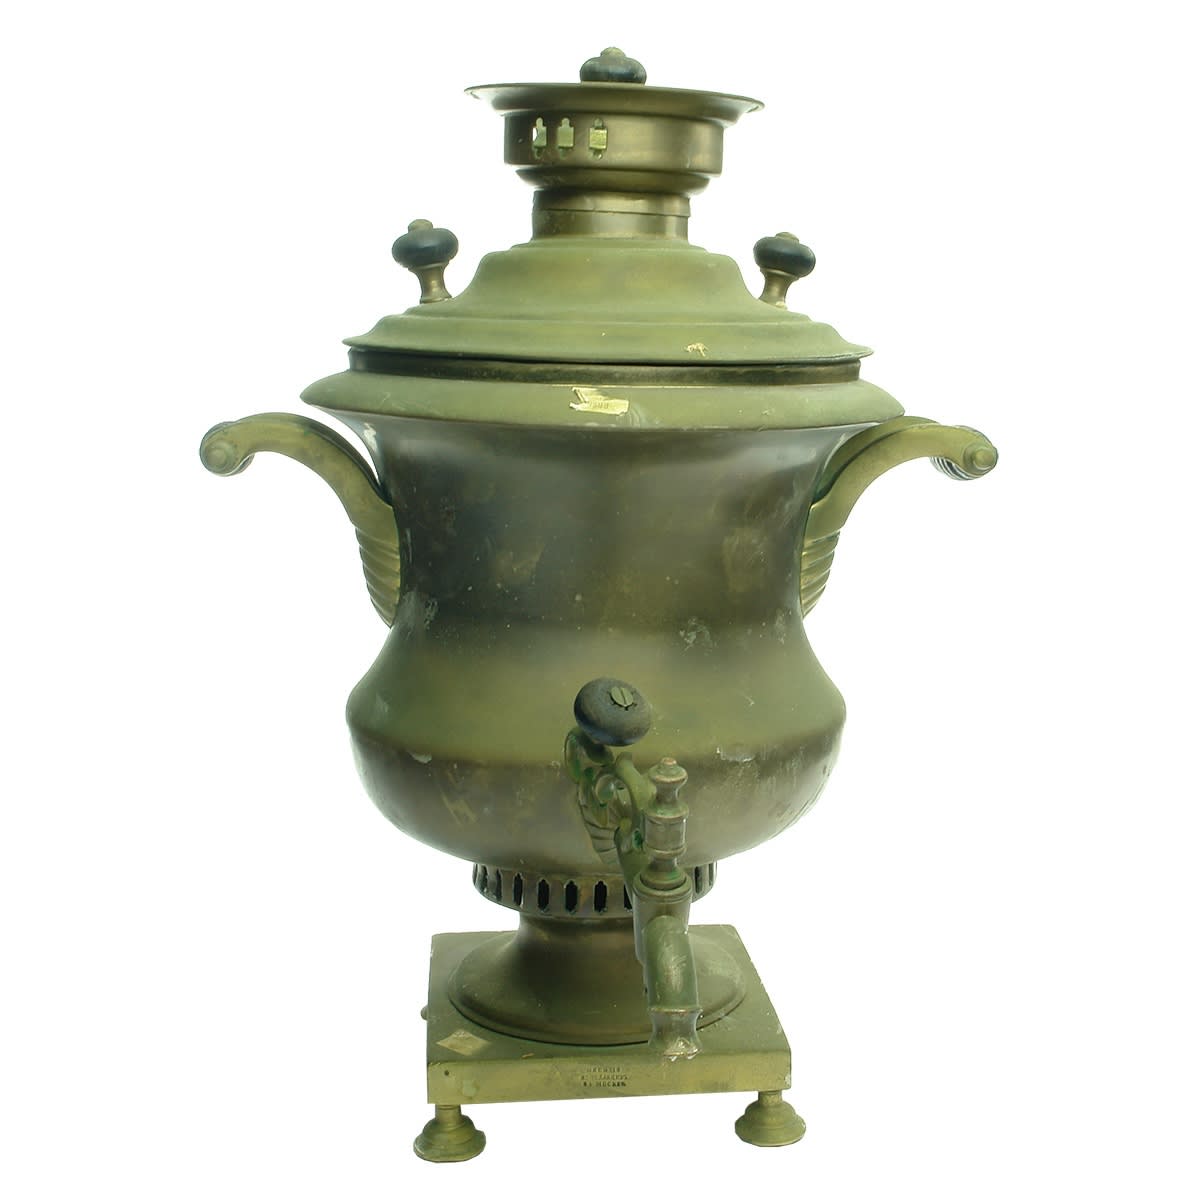 Large Brass Samovar. Hot water urn. Russian brand/writing stamped to lower front.